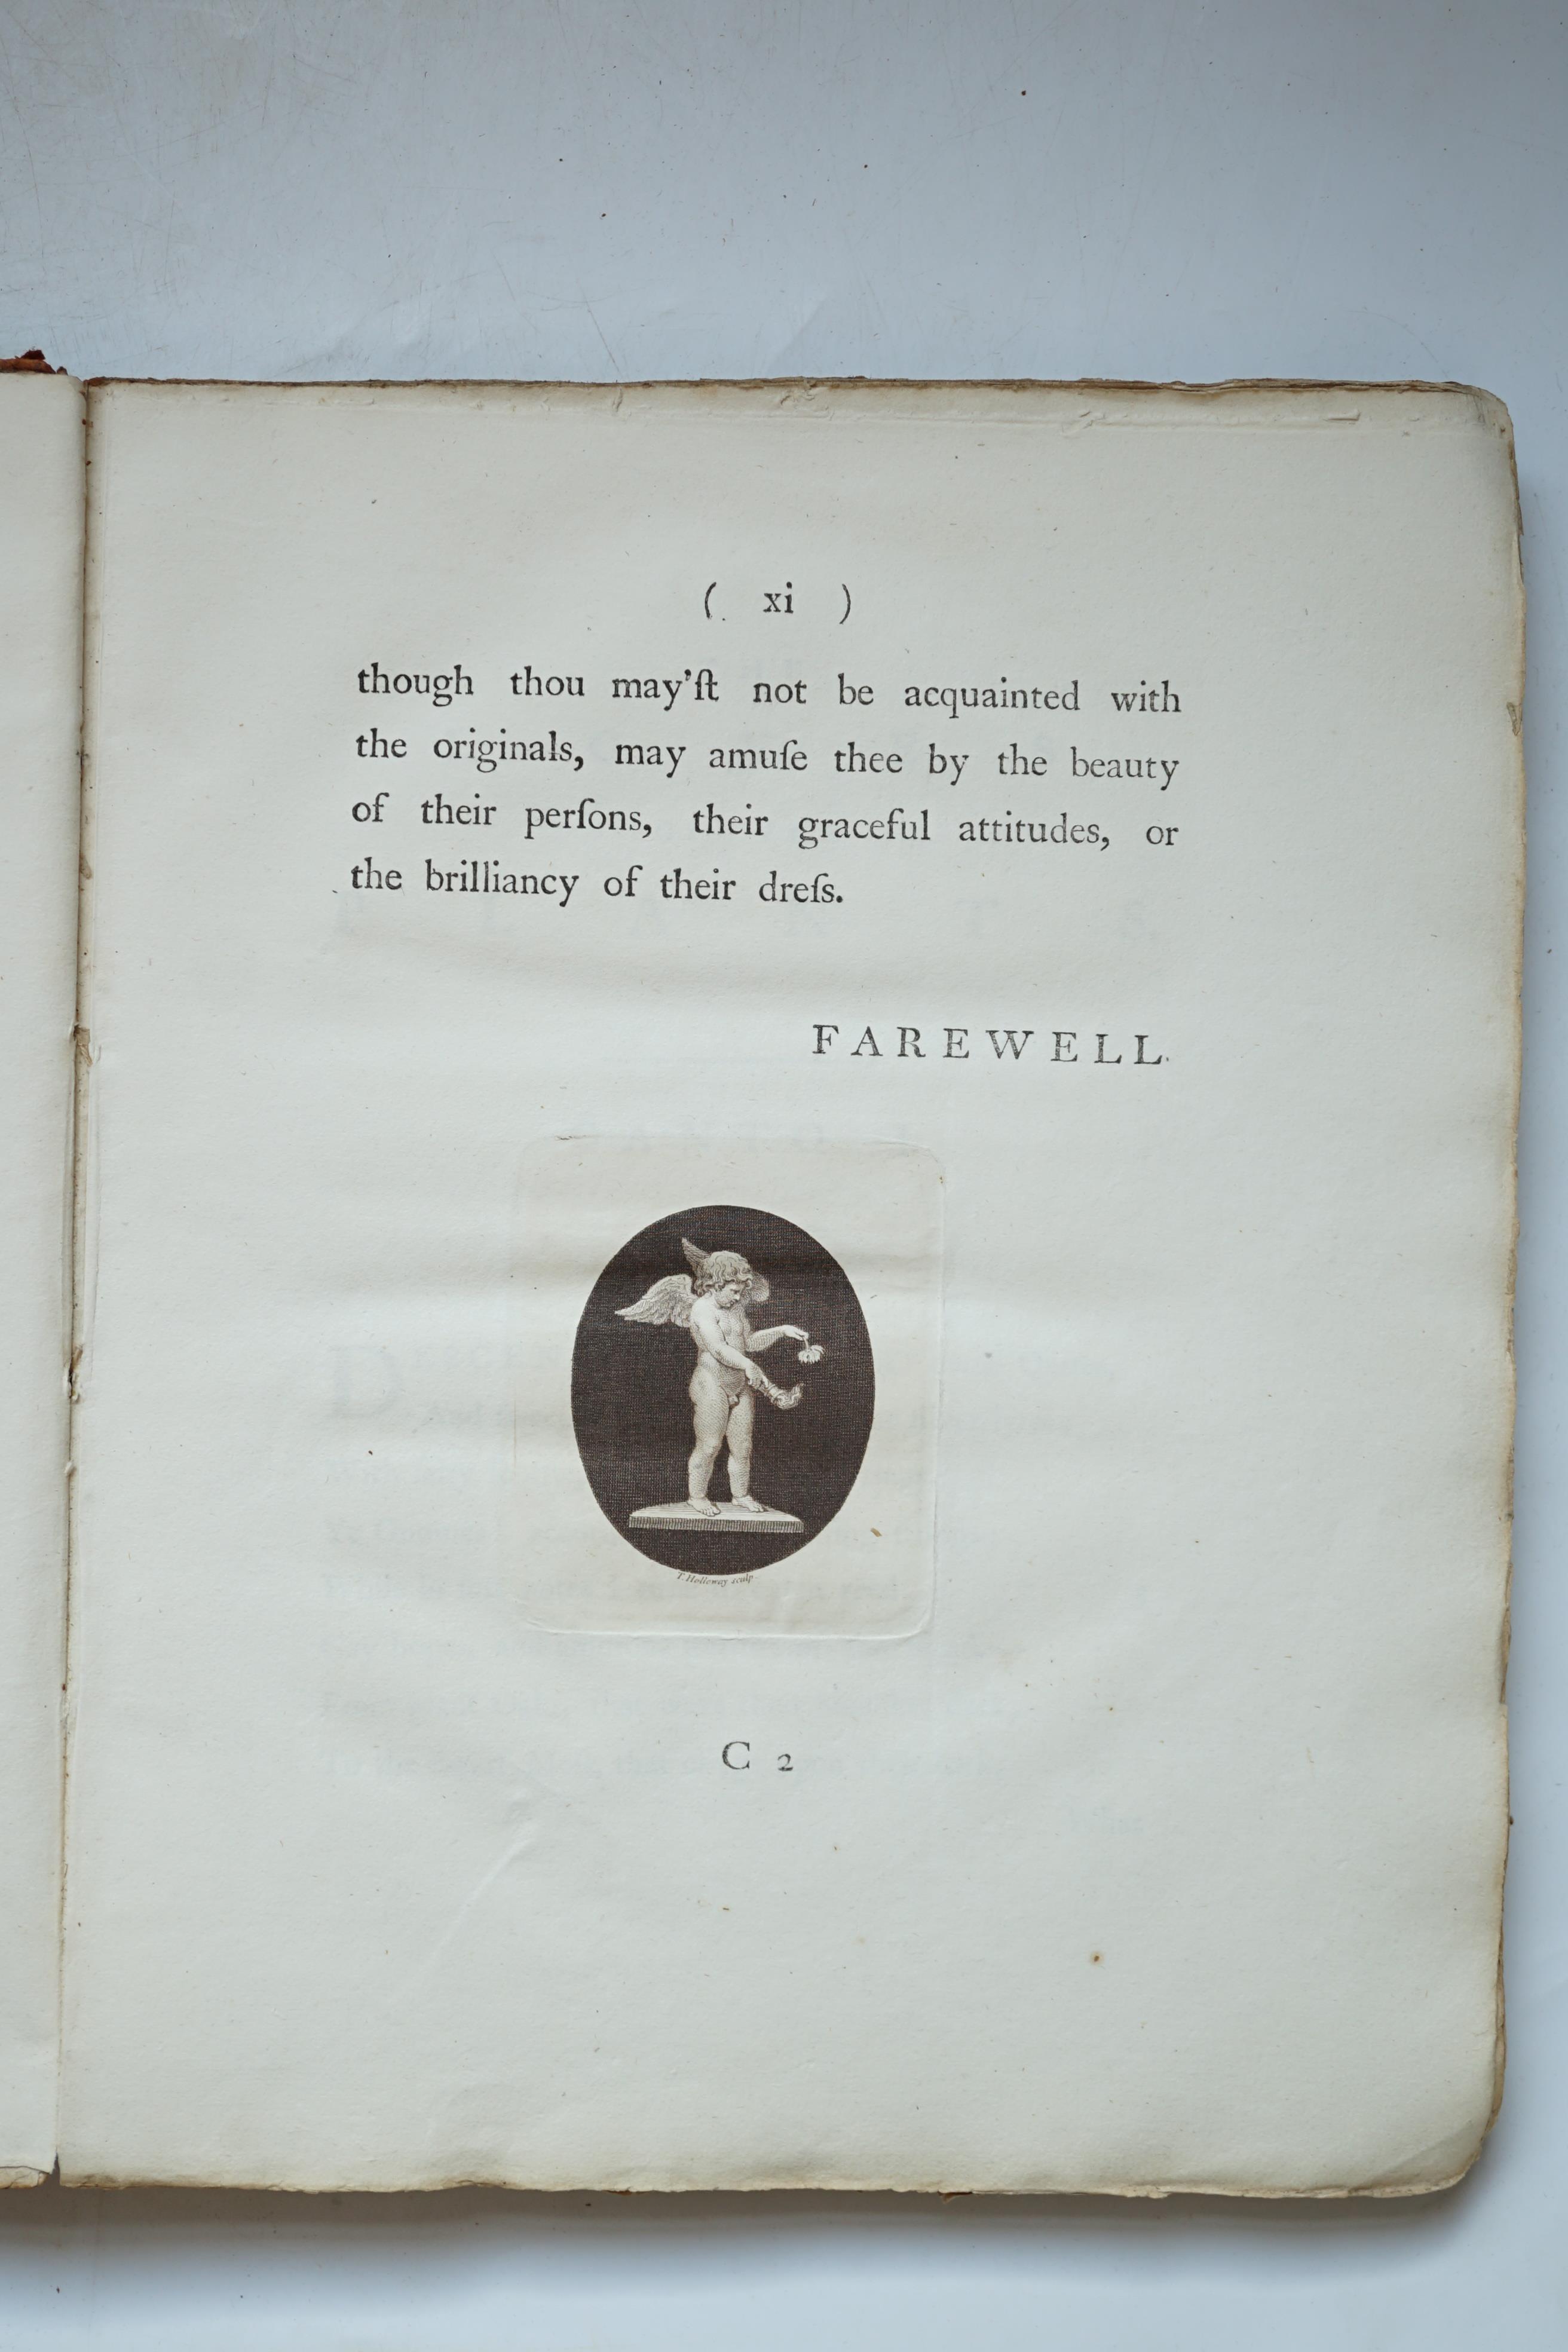 [Darwin, Erasmus] - The Botanic Gardens. Part ll. Containing the Loves of the Plants. A Poem with Philosophical Notes, 2nd edition, vol 2 only, with engraved frontispiece and 9 plates by F.P. Nodder, 4to, quarter calf, s